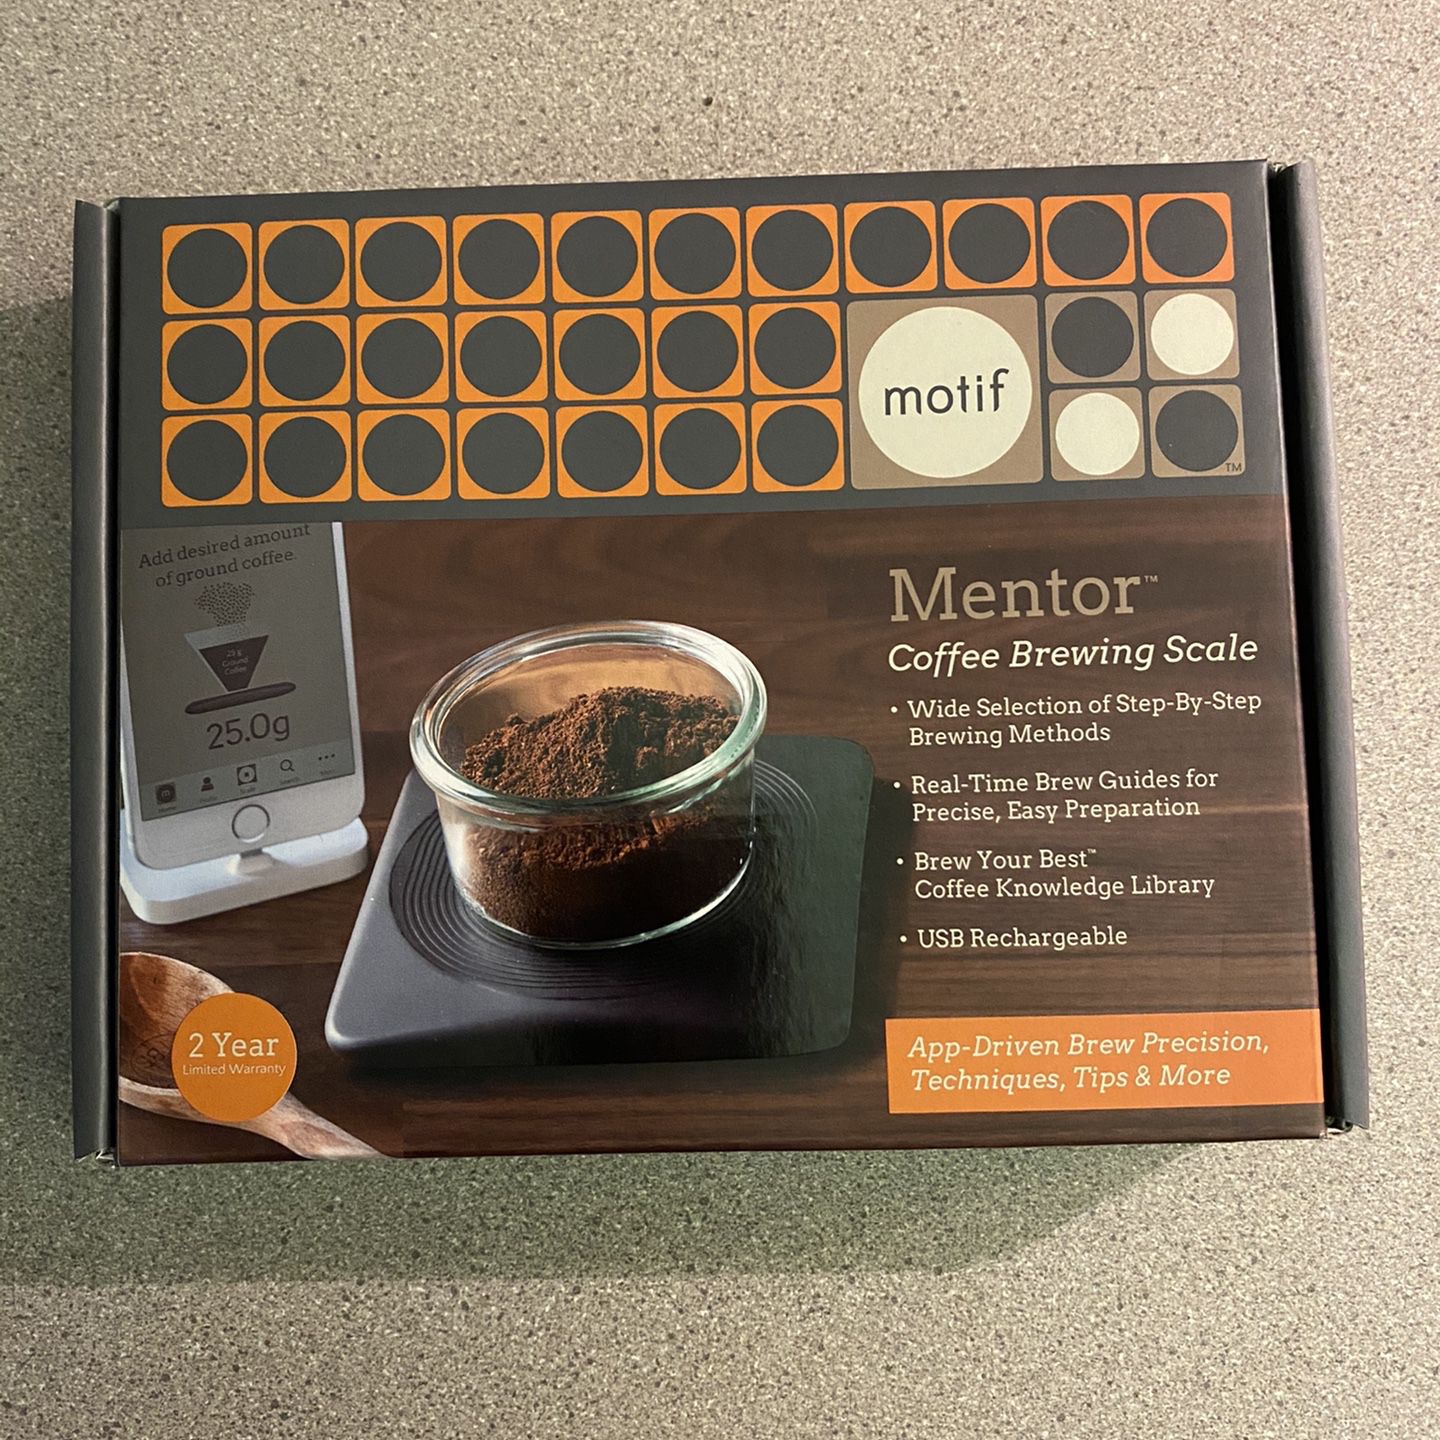 Mentor Coffee Brewing Acale